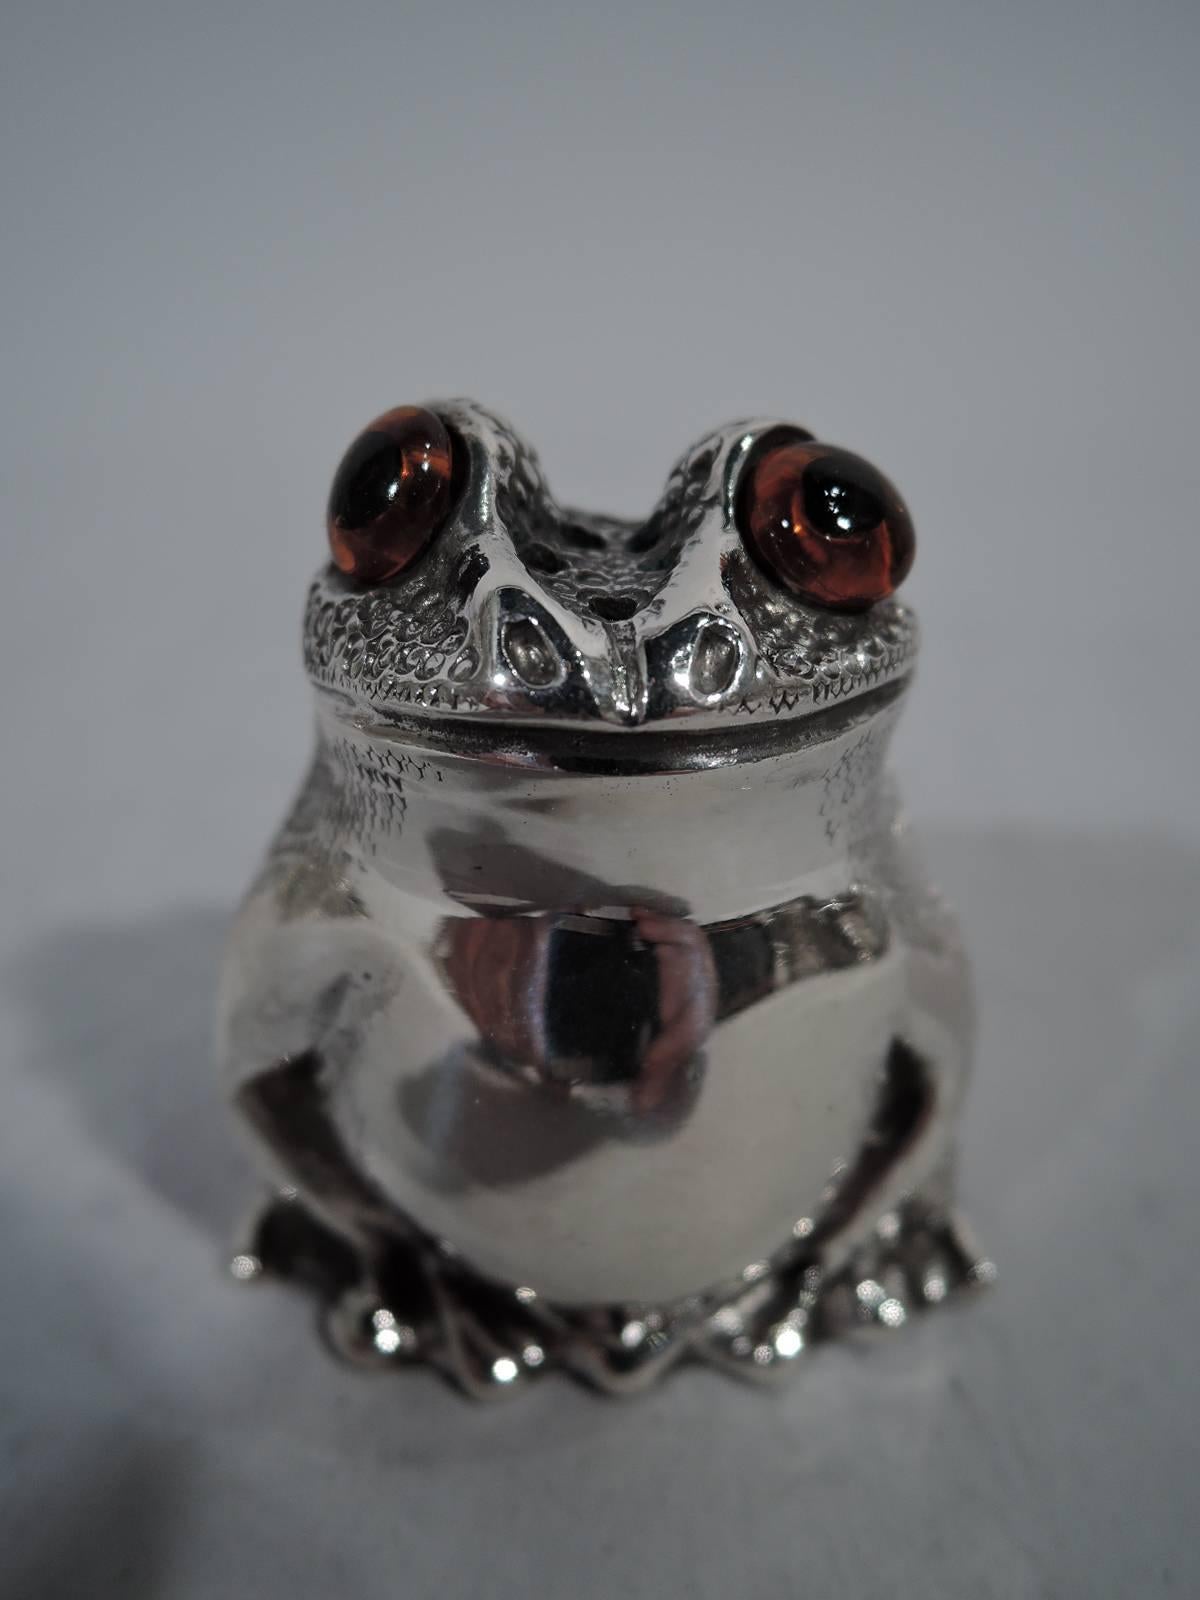 Pair of English sterling silver figural salt and pepper shakers. Each: A squatting reptile with legs gathered close to body. Scaly back, smooth front, and intense glass exophthalmic eyes. Closed mouth set in smirking smile. One has plastic plug; the